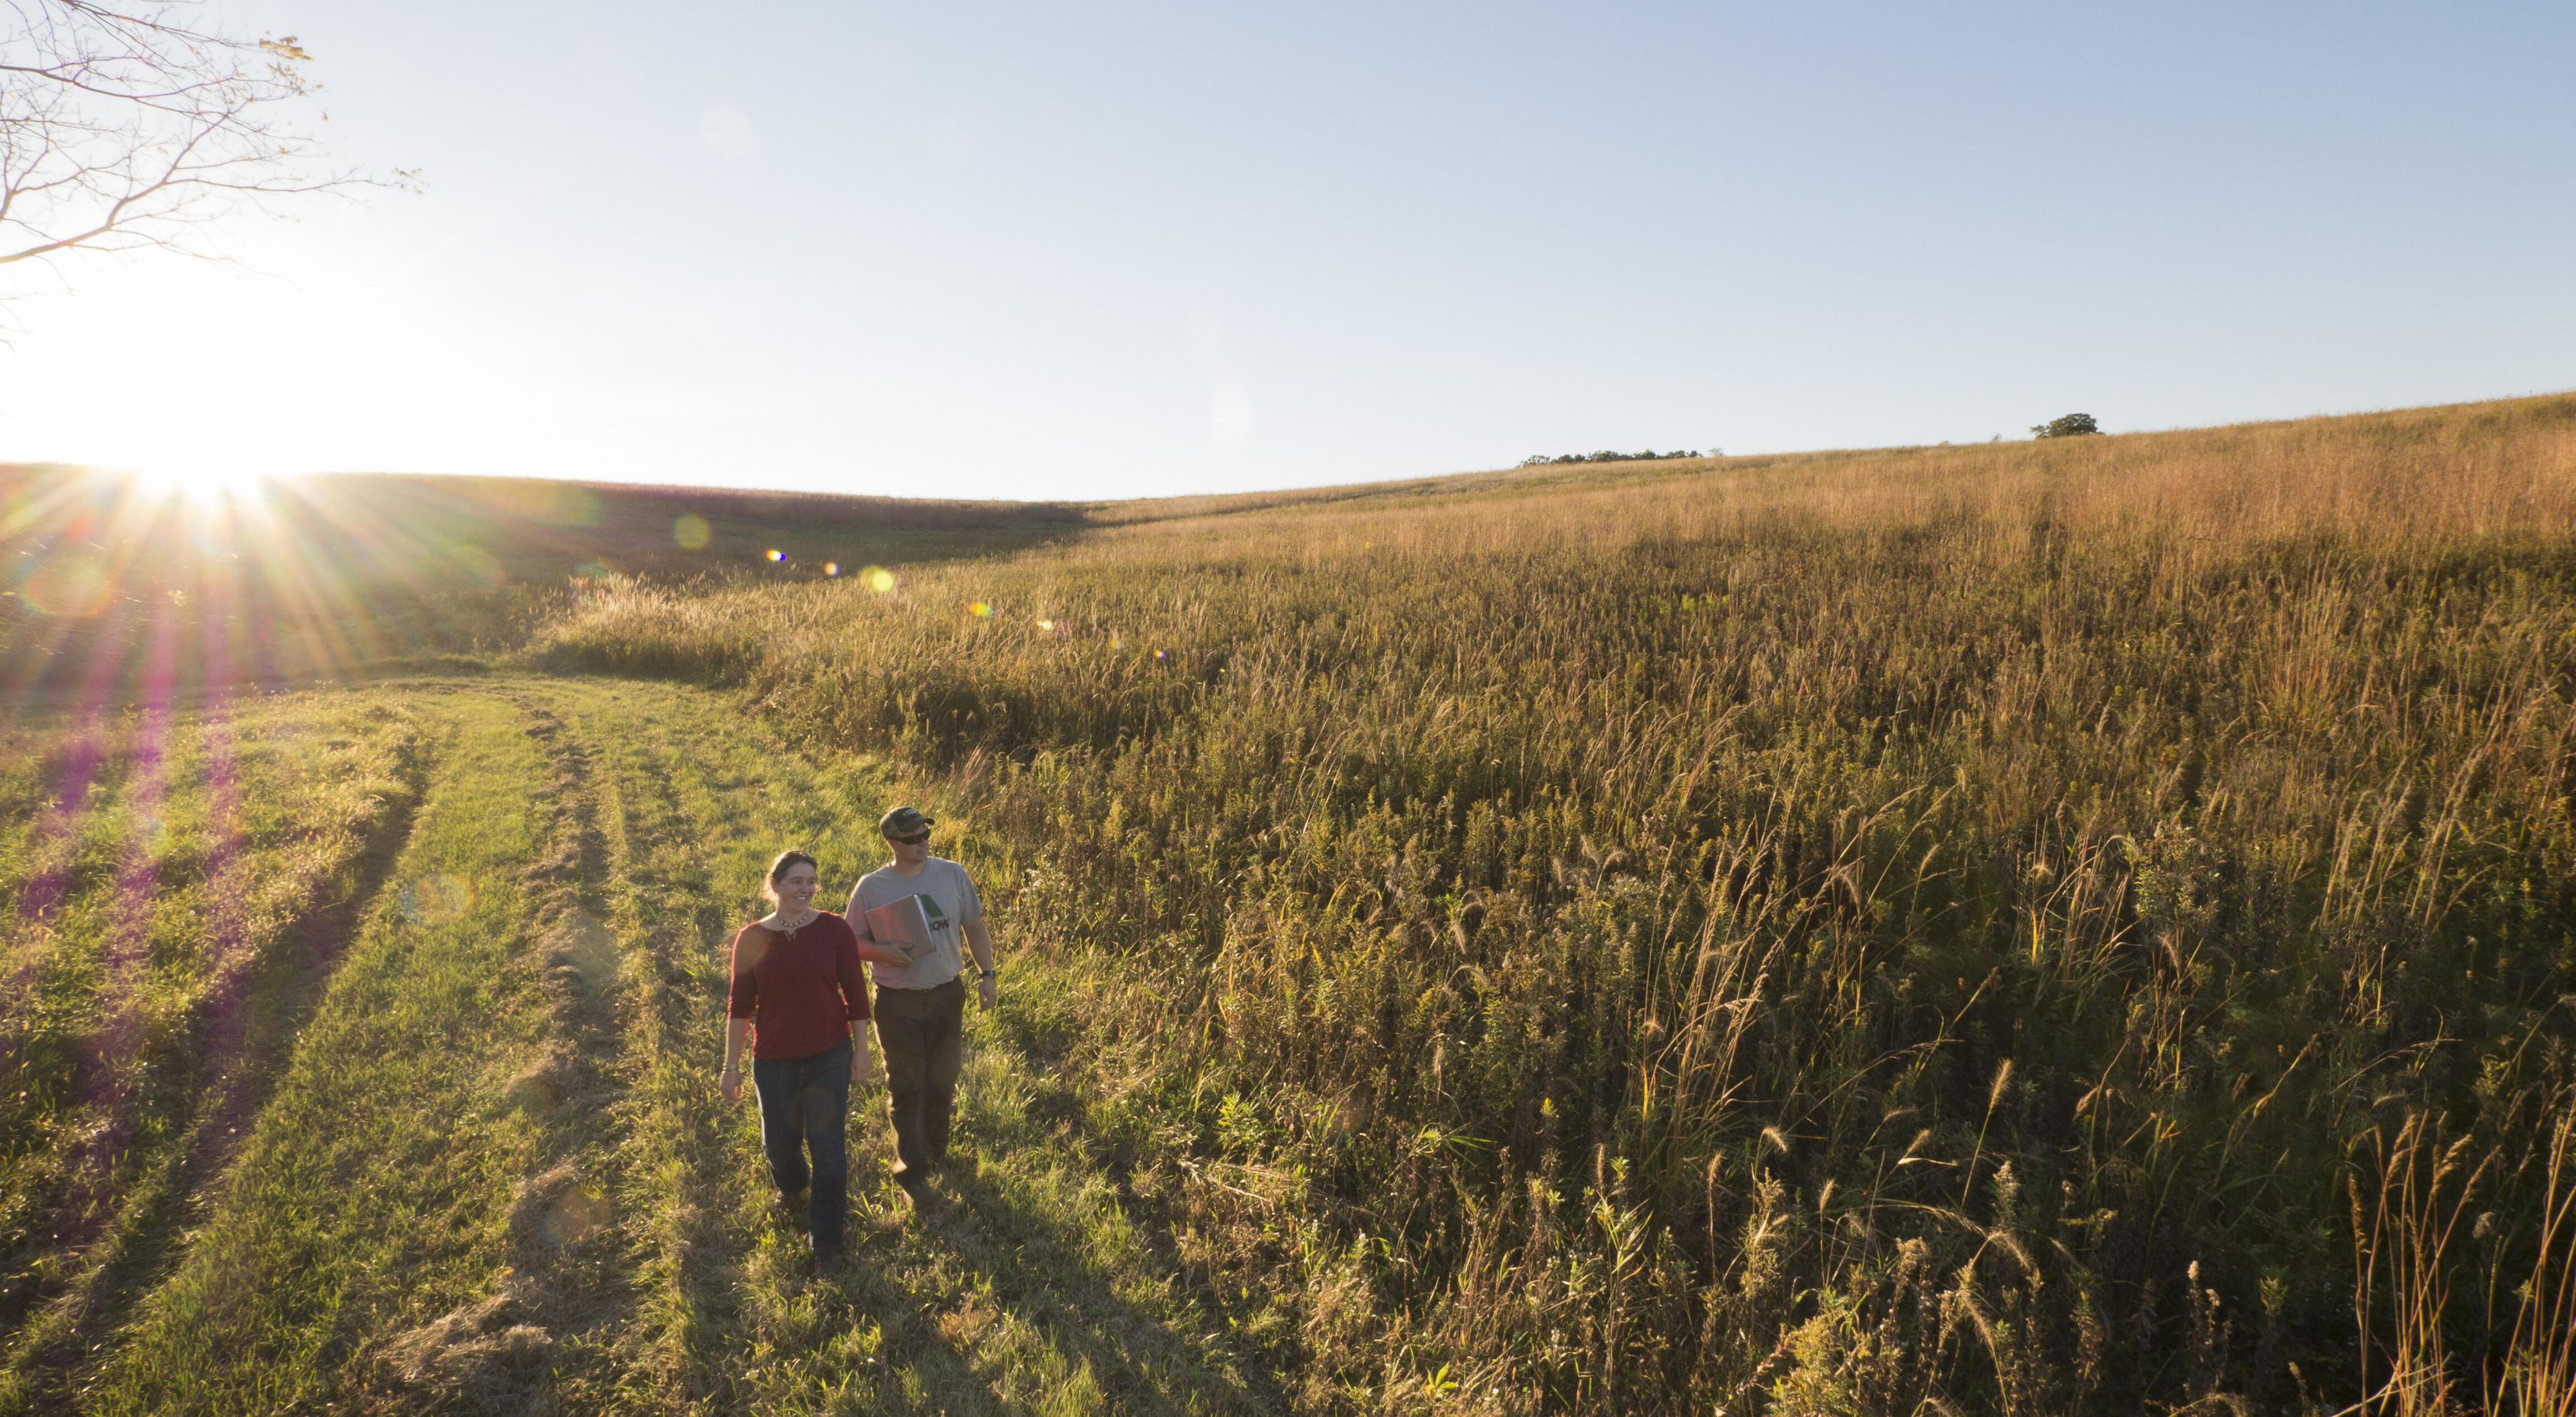 A man and woman walk along a mowed path in a restored prairie in Wisconsin as the sun rises behind them.